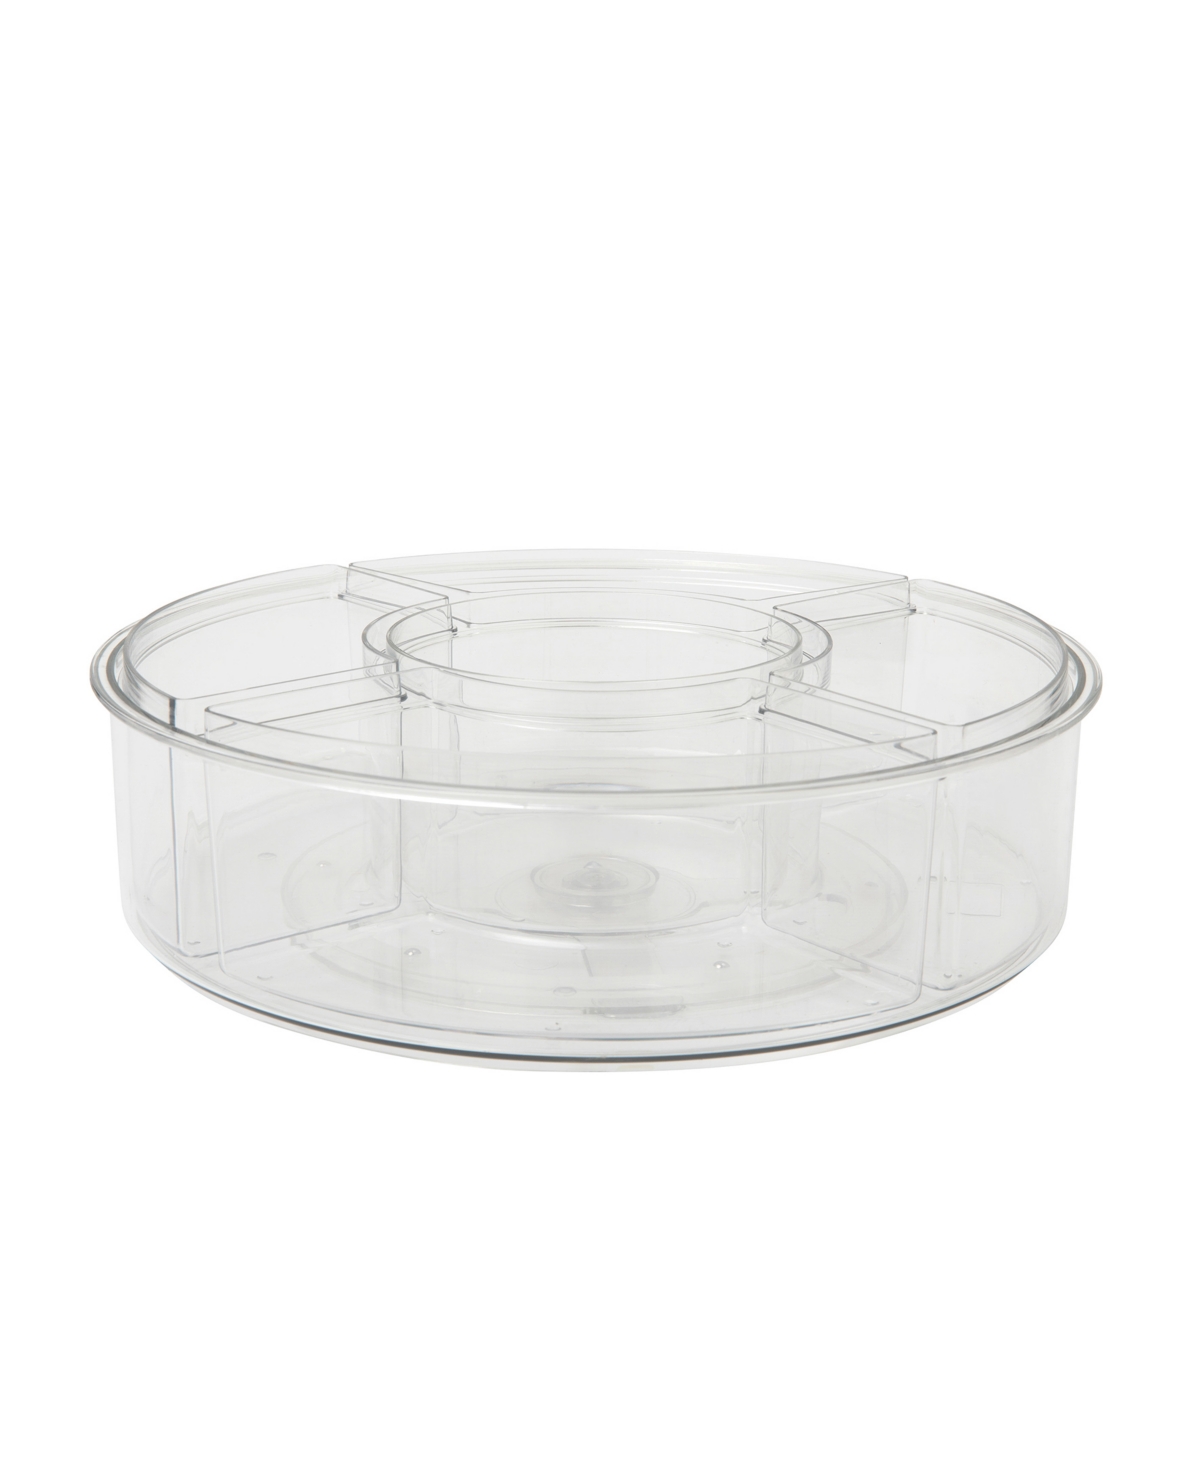 Brody Divided Lazy Susan Organizer with 5 Removable Bins, Plastic 360 Degree Rotating Desk Storage Organizer, 12" - Clear